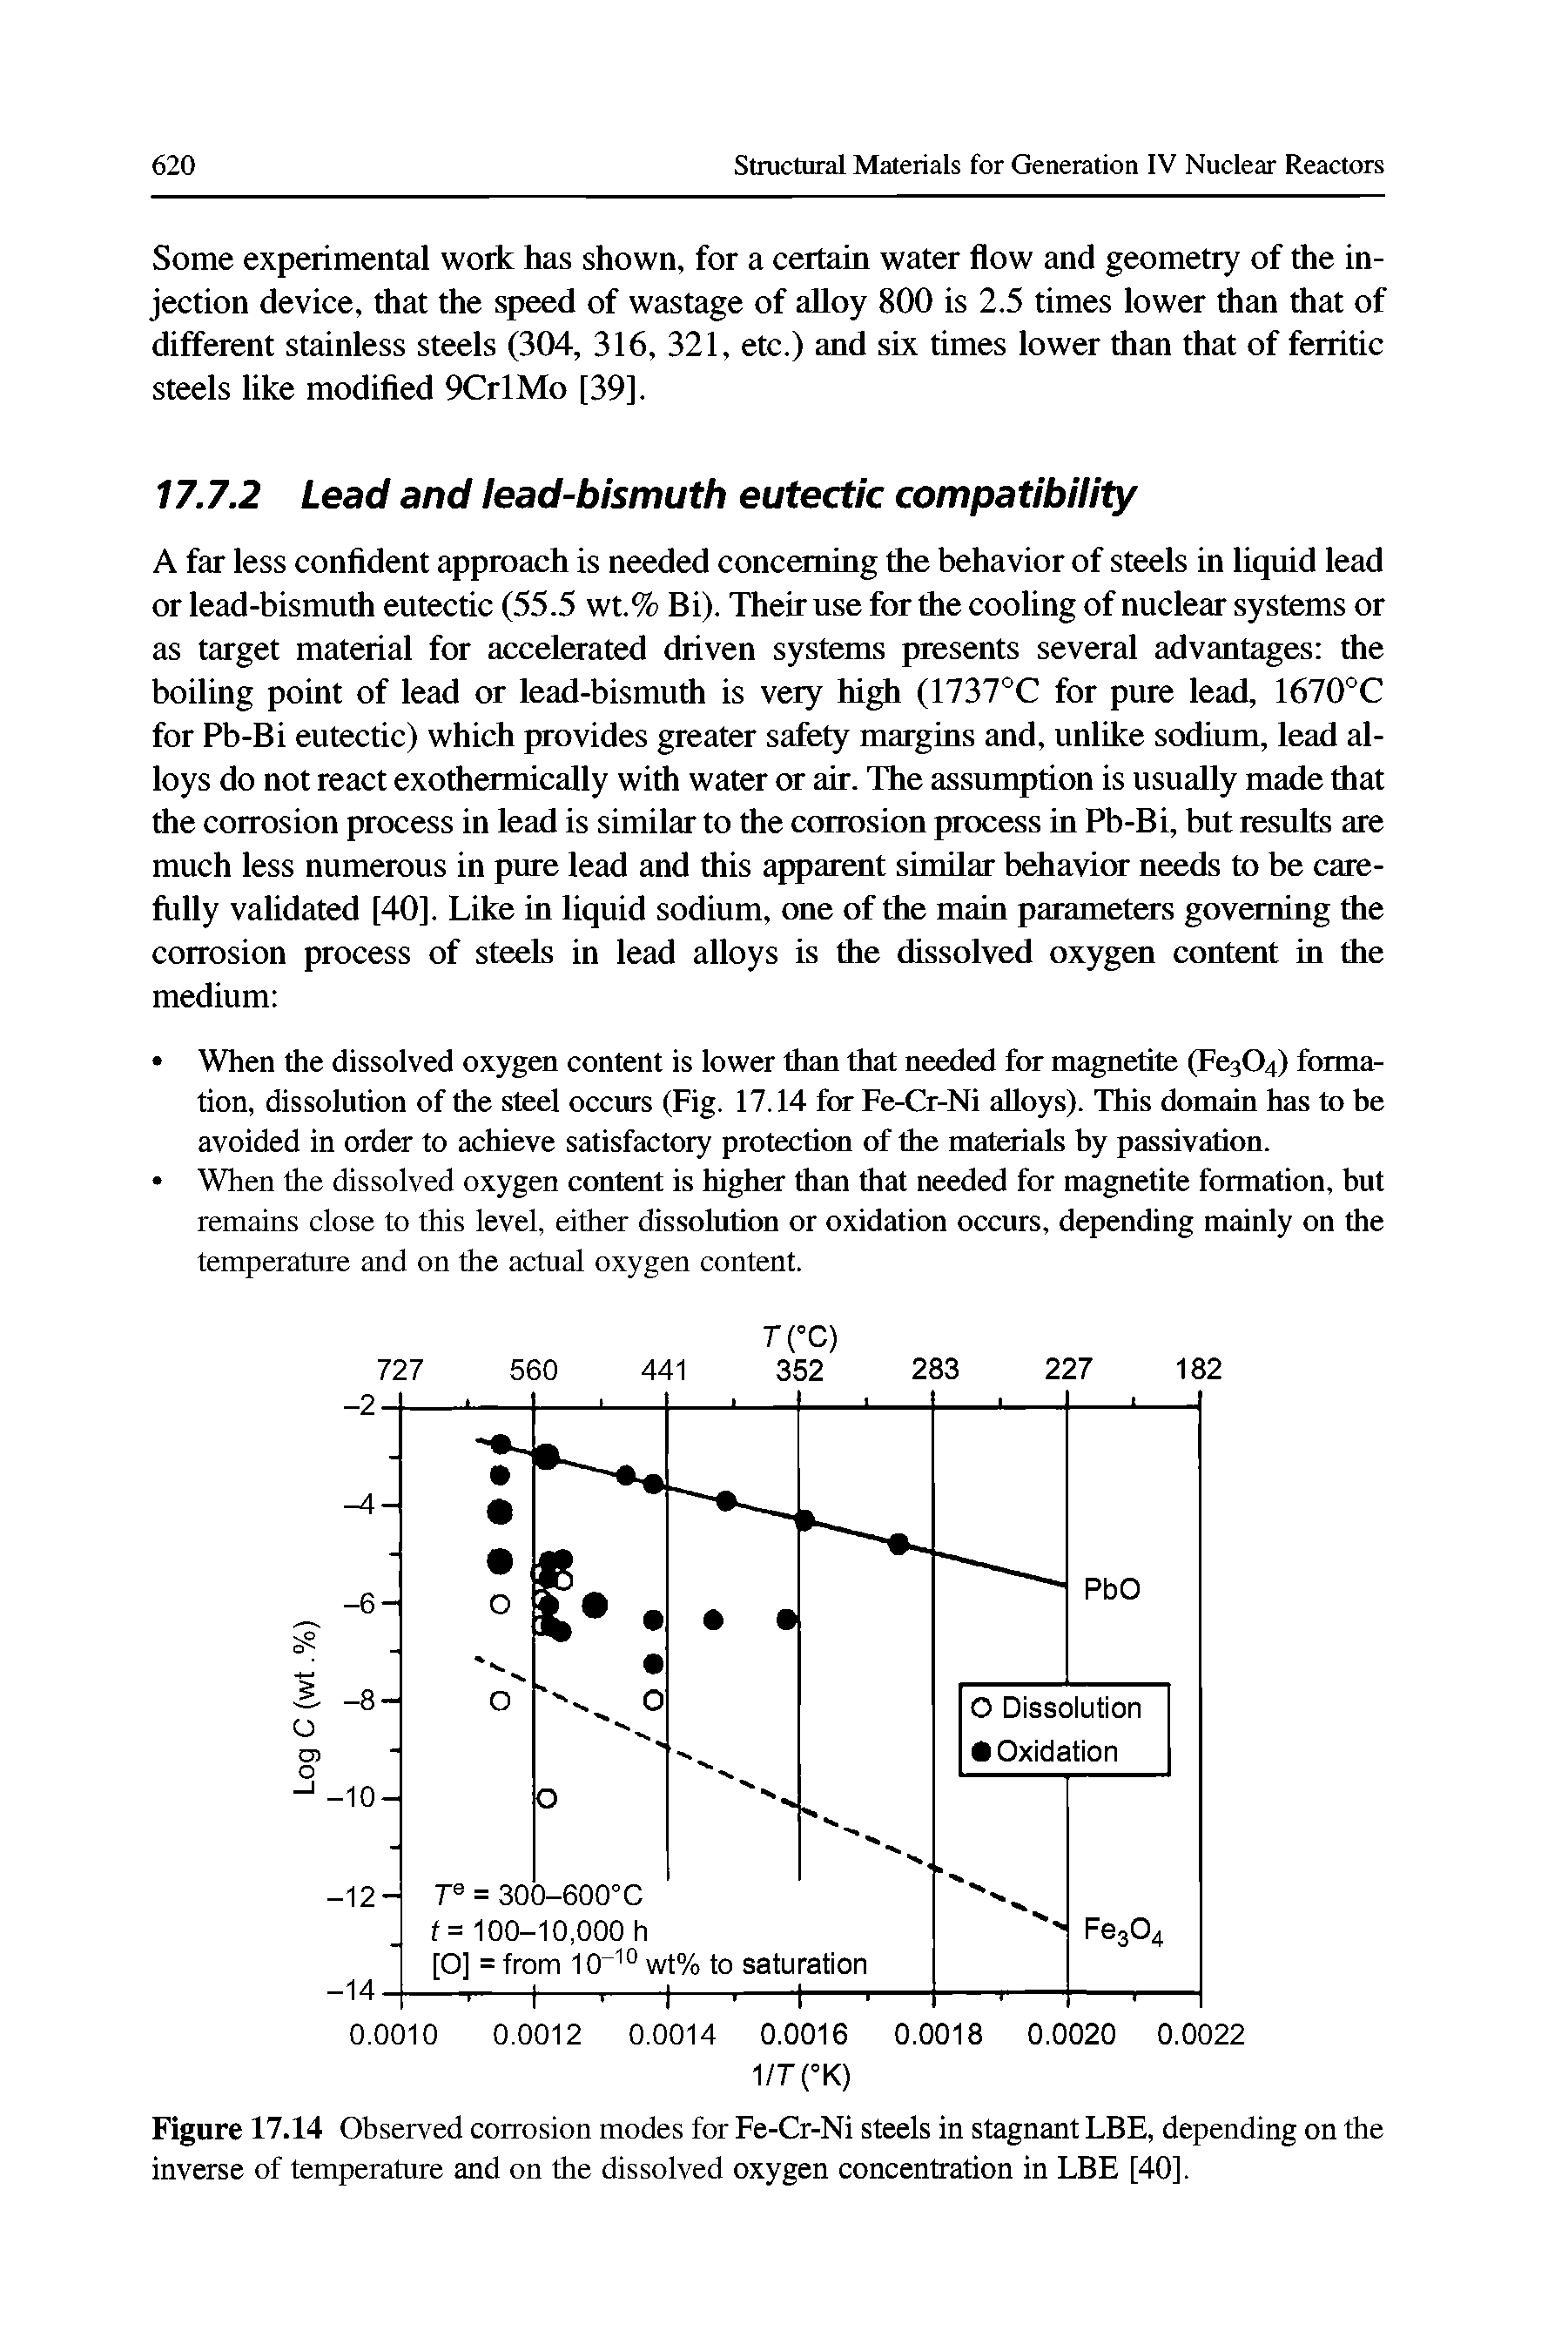 Figure 17.14 Observed corrosion modes for Fe-Cr-Ni steels in stagnant LBE, depending on the inverse of temperature and on the dissolved oxygen concentration in LBE [40].